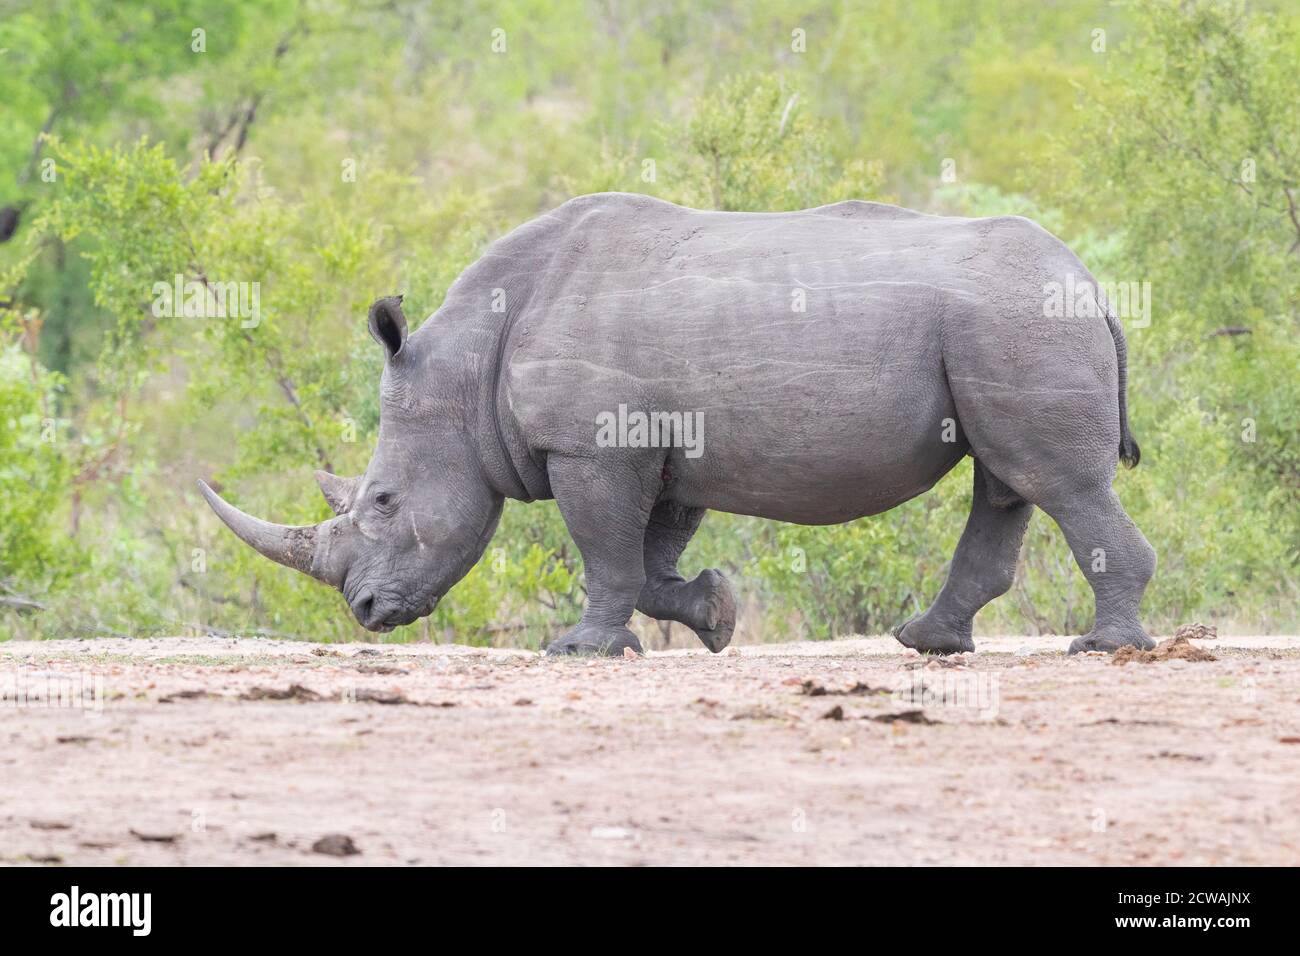 White Rhinoceros (Ceratotherium simum), side view of an adult male walking, Mpumalanga, South Africa Stock Photo